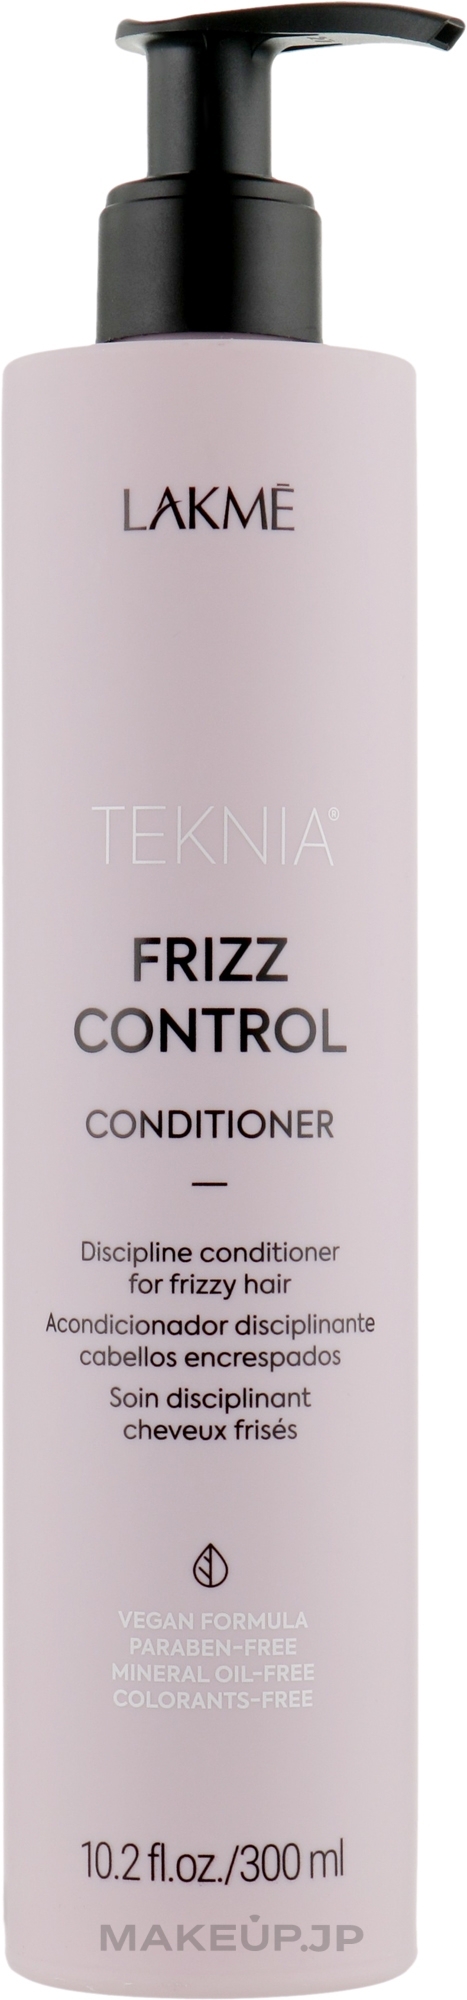 Disciplining Conditioner for Unruly & Frizzy Hair - Lakme Teknia Frizz Control Conditioner — photo 300 ml